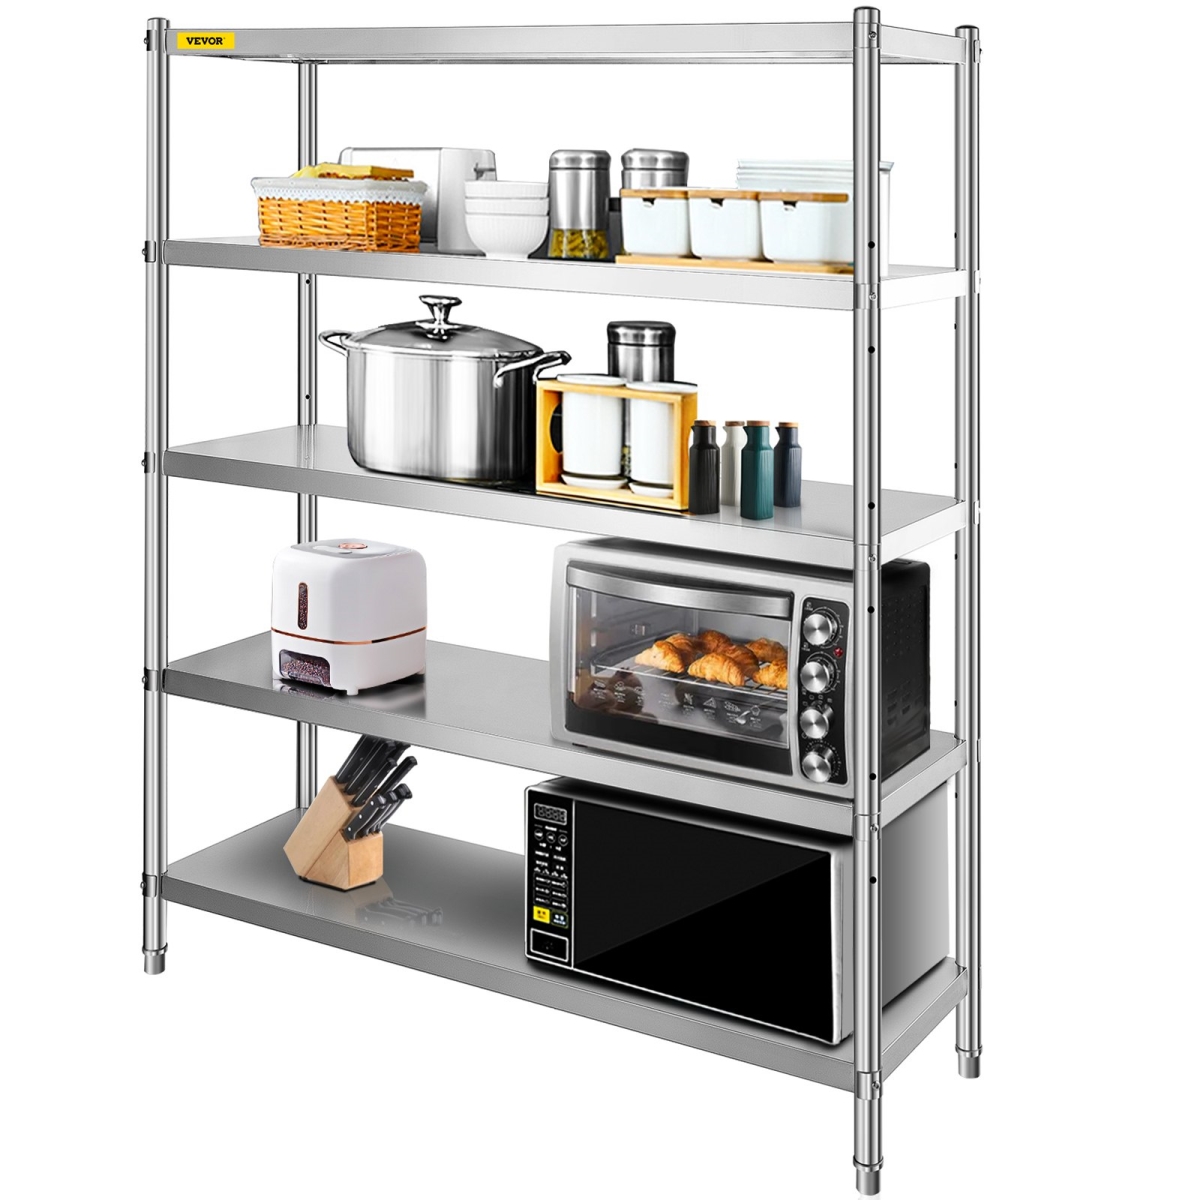 Picture of Vevor BXGHJ5C60X18.5YC1V0 60 x 18.5 in. 5 Tier Adjustable Stainless Steel Shelving